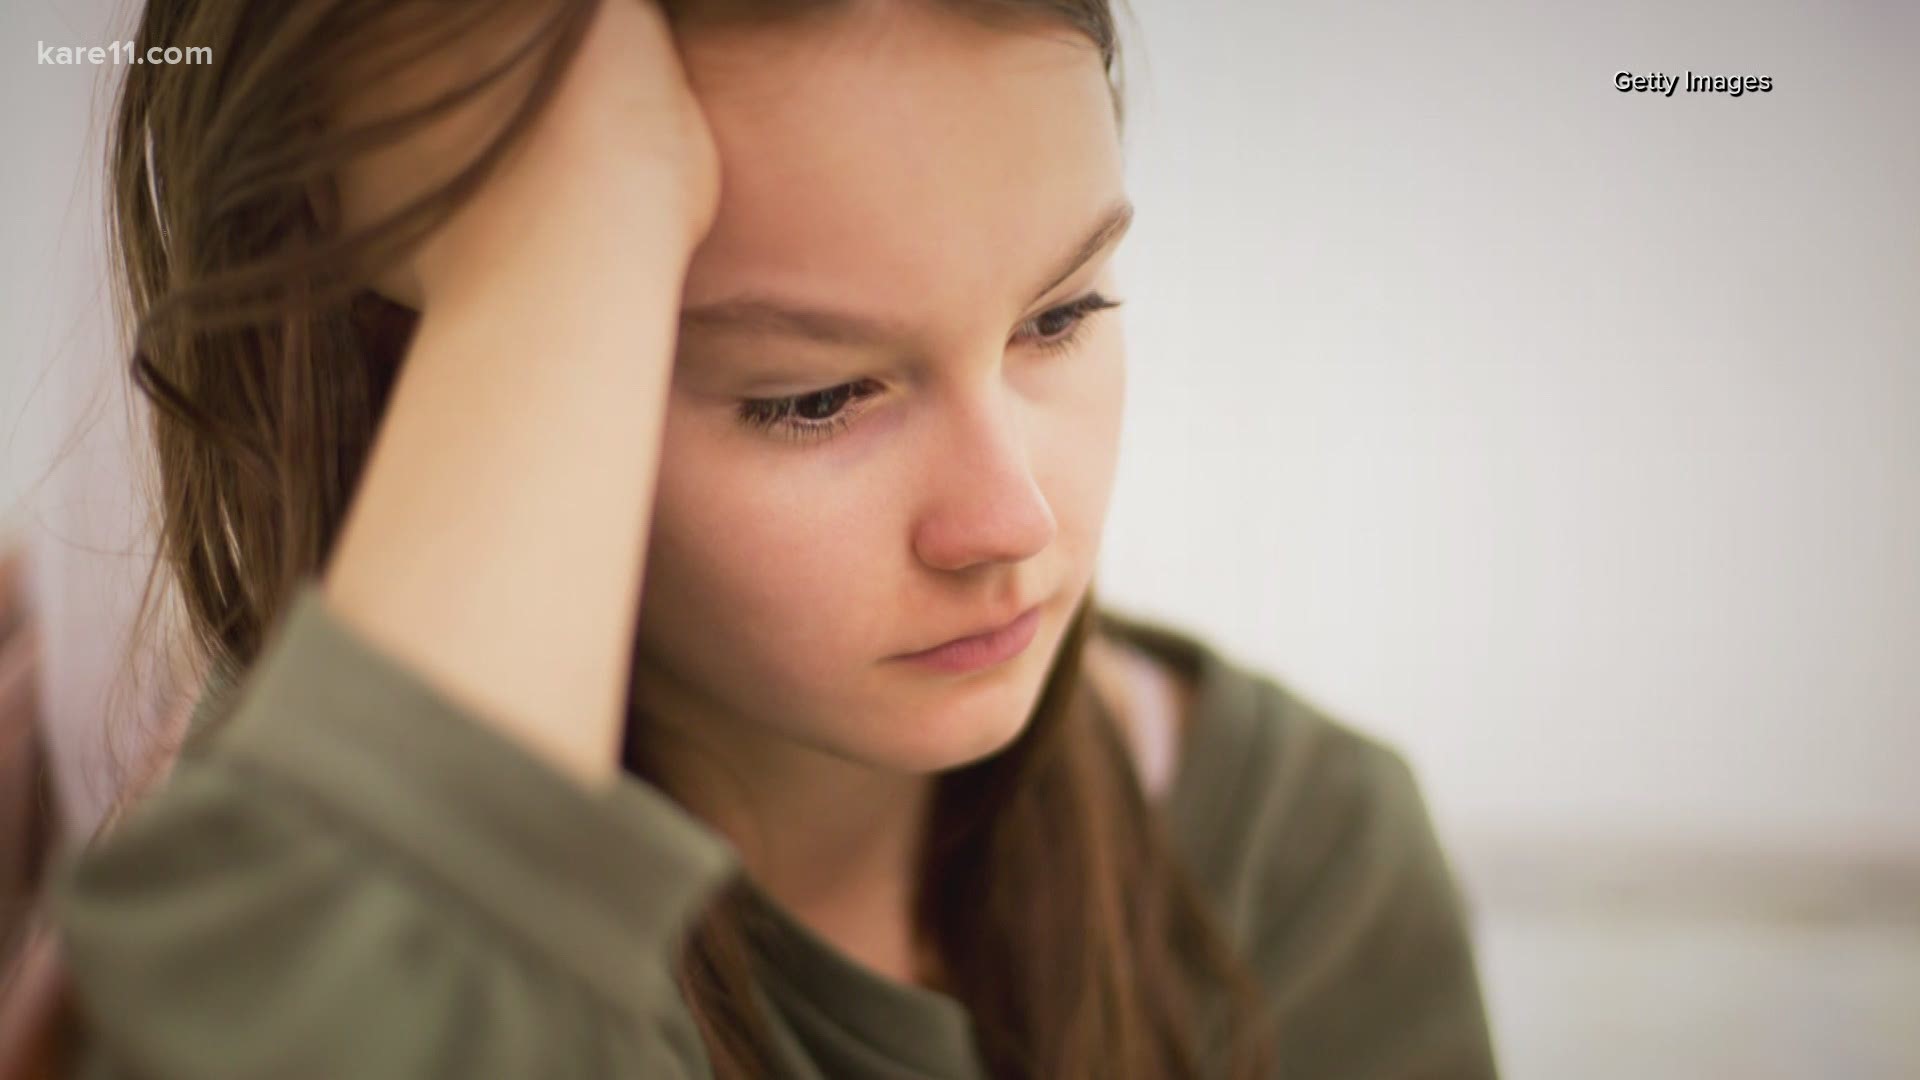 A doctor gives us guidance on things to do regarding teen suicide prevention.